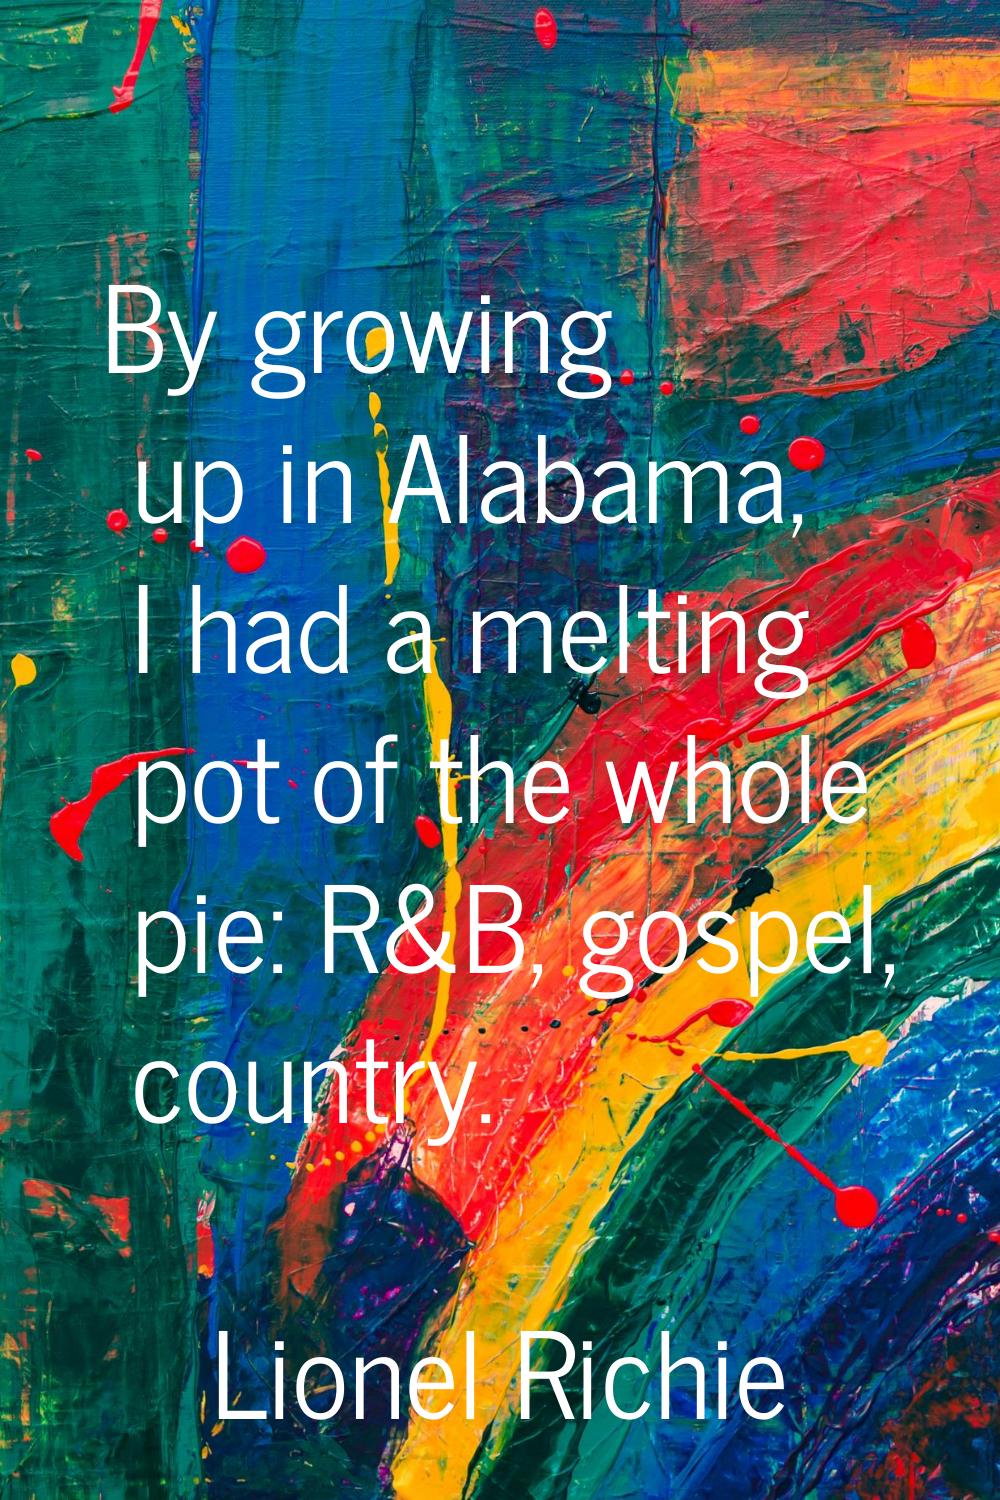 By growing up in Alabama, I had a melting pot of the whole pie: R&B, gospel, country.